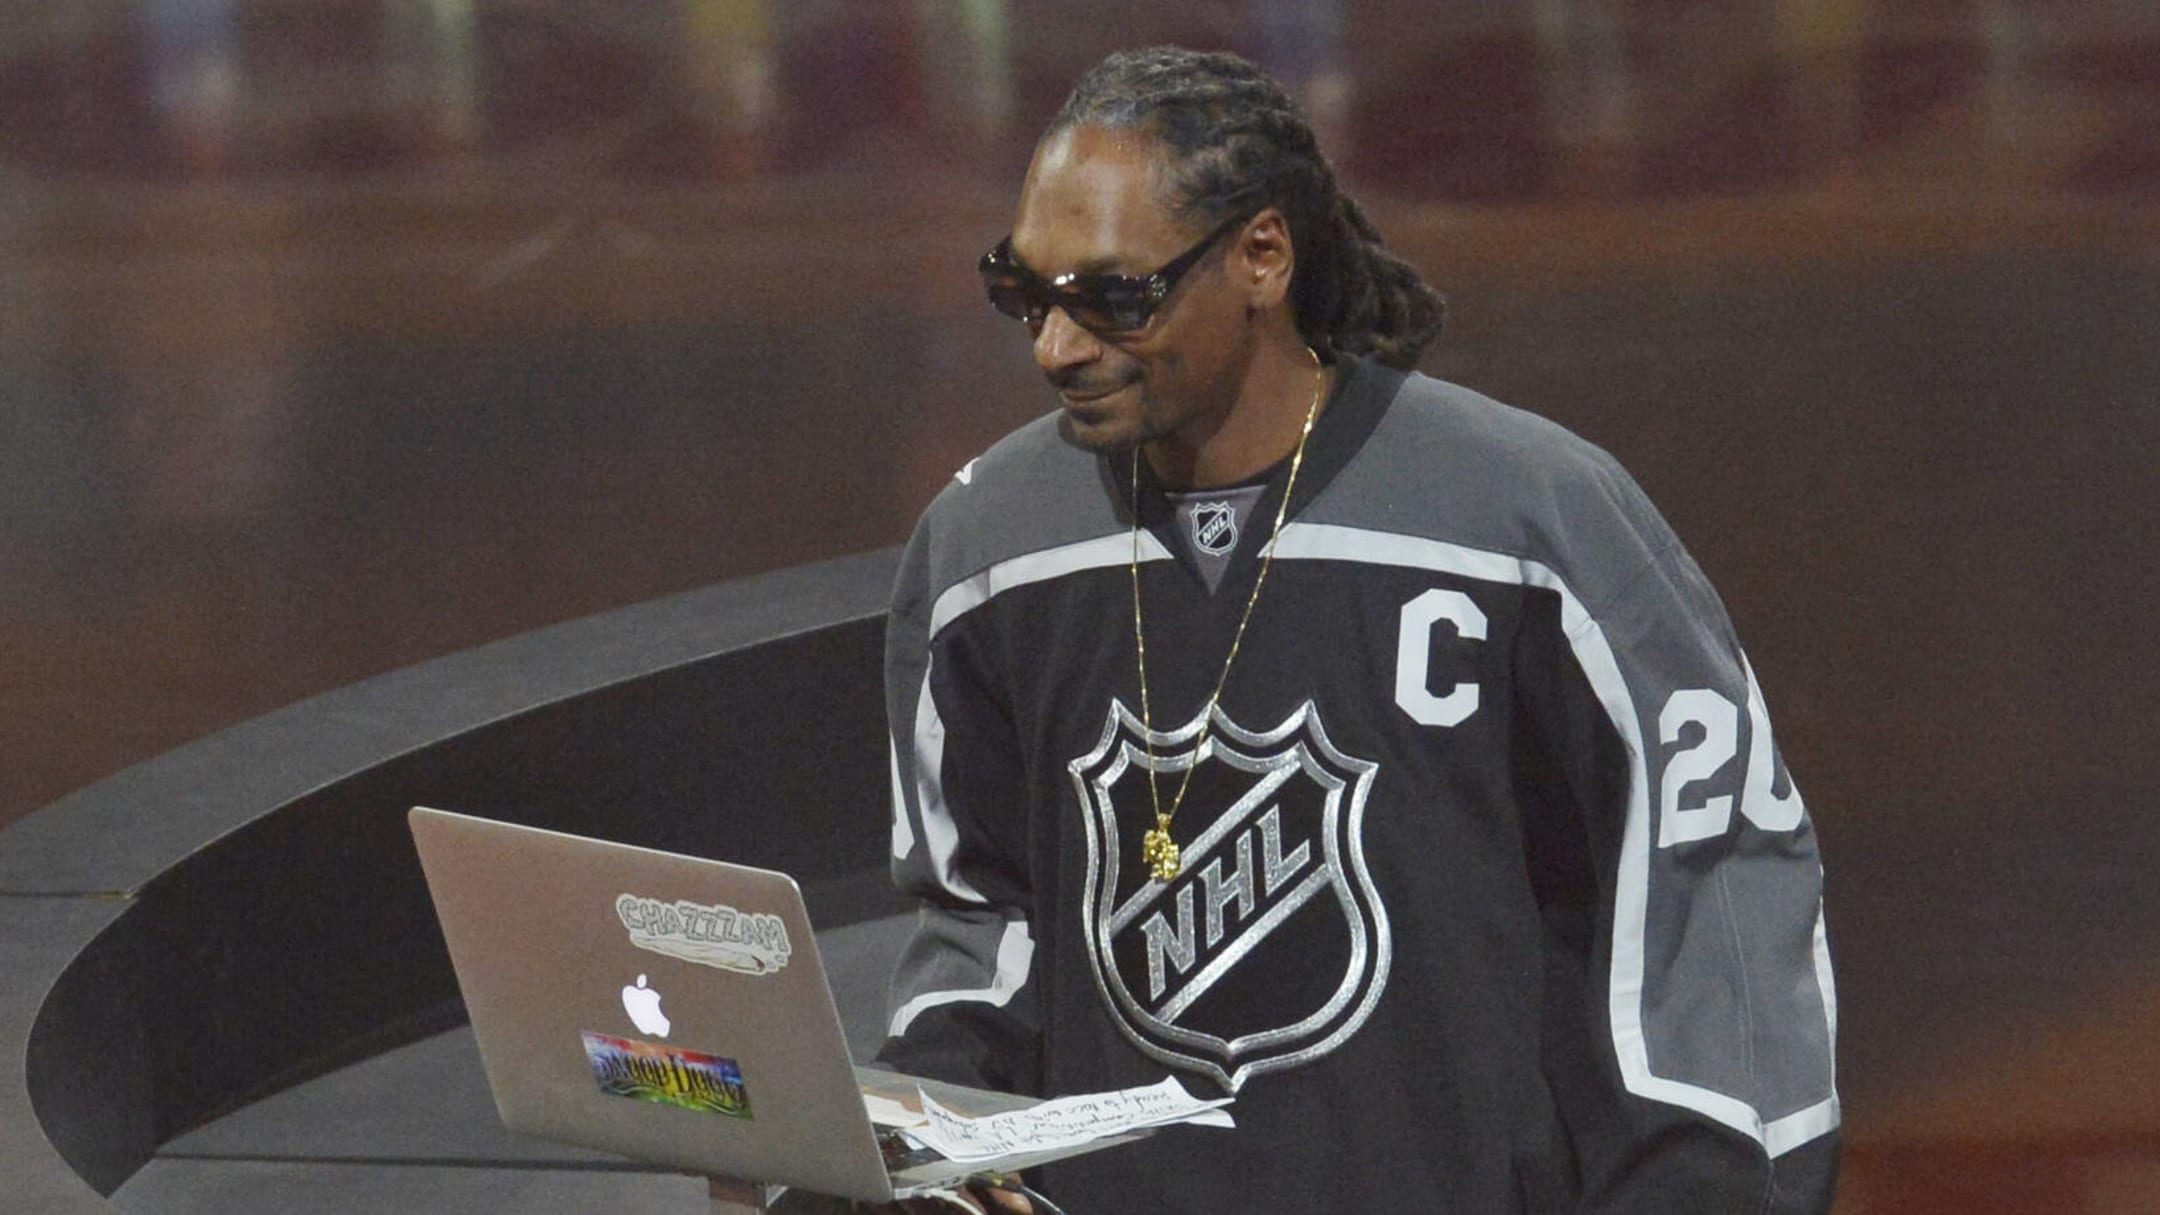 Snoop Dogg on Instagram] Amazing what Neko Sparks is trying to do in Ottawa  & I'm looking forward to being apart of that ownership group. I WANNA BRING  HOCKEY TO OUR COMMUNITY 